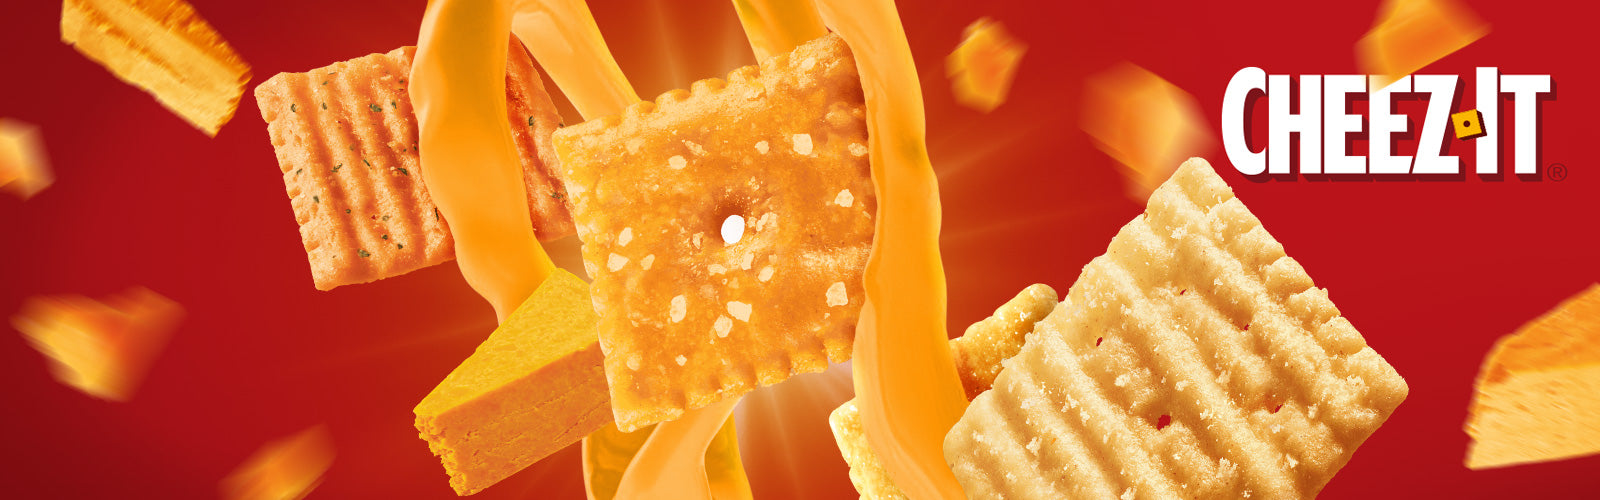 Cheez it collection banner